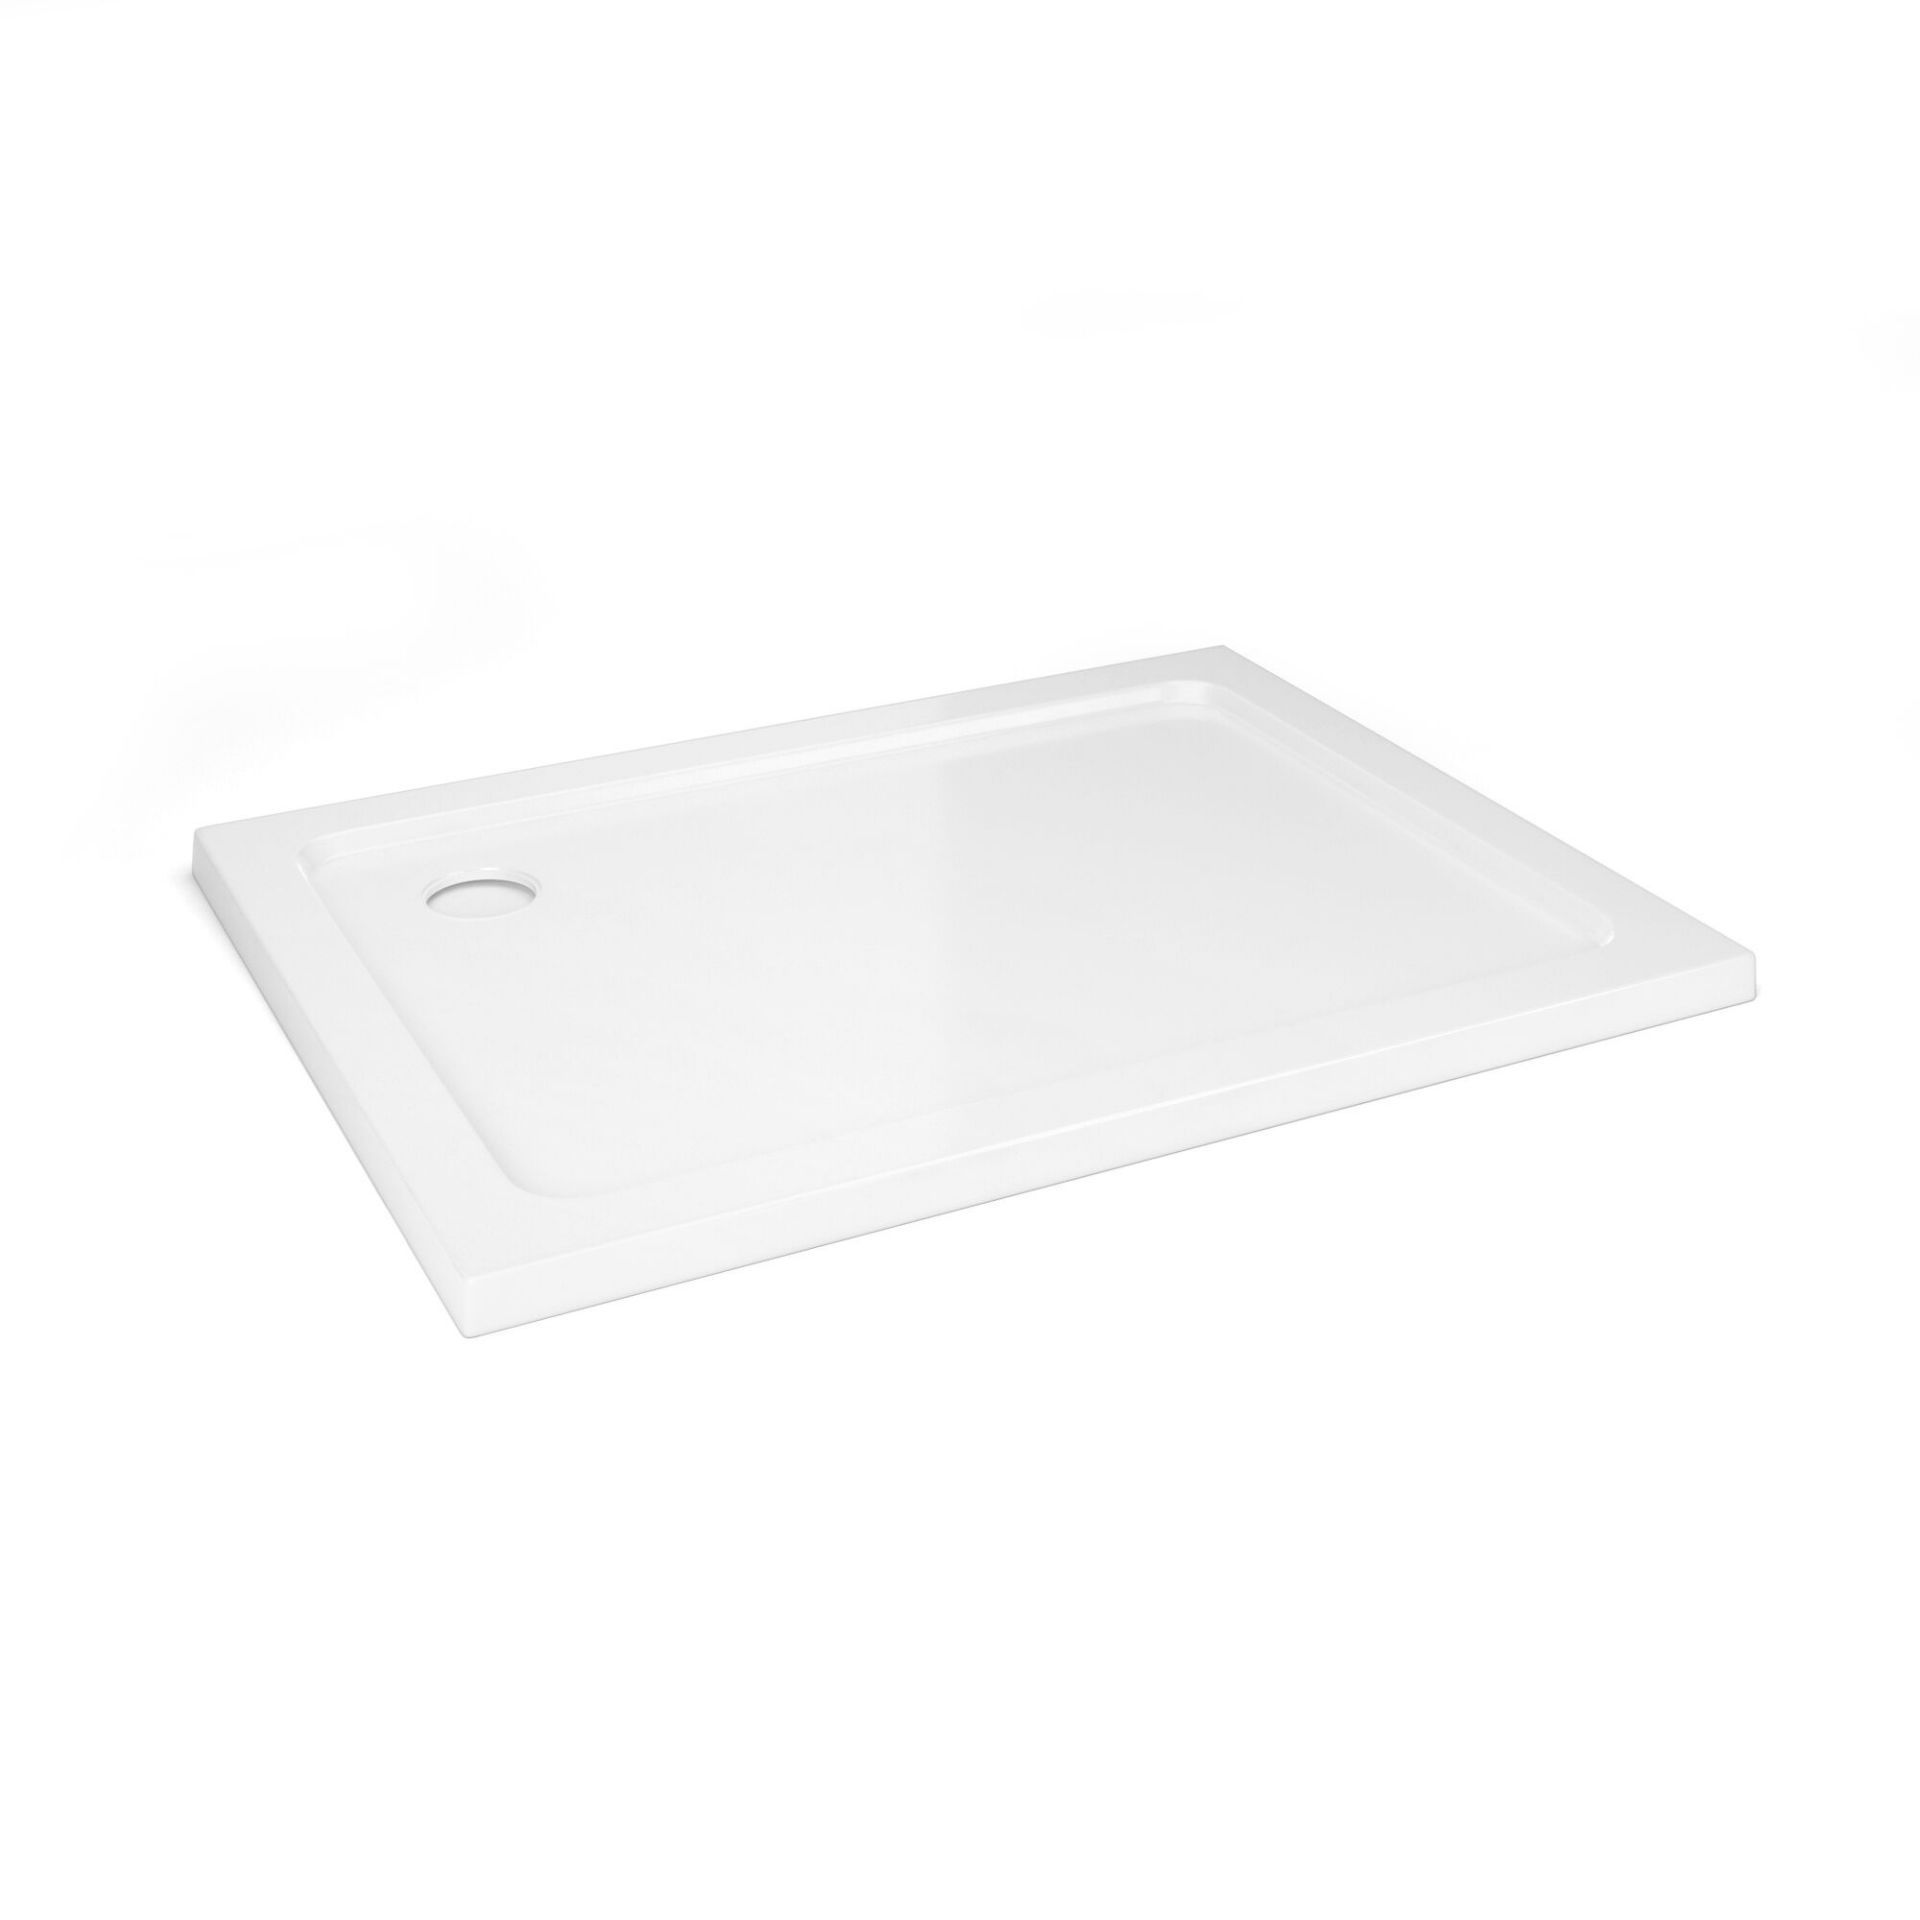 NEW 1000x760mm Rectangular Stone Shower Tray - Ultra Slim.RRP £299.99.Low profile ultra slim d... - Image 2 of 2